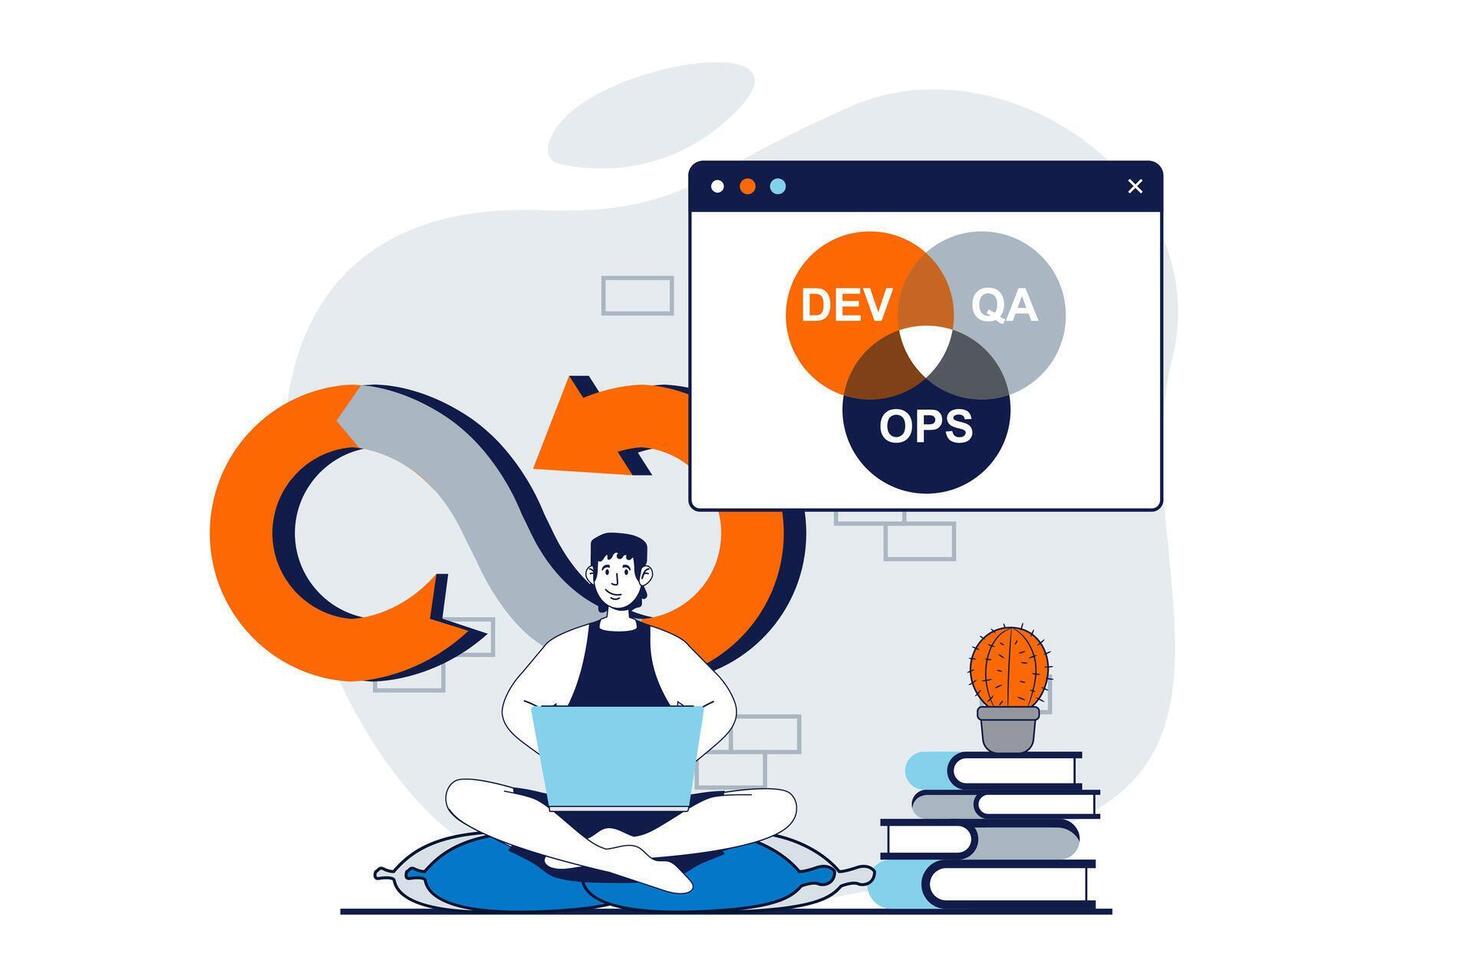 DevOps concept with people scene in flat design for web. Man monitoring workflow, integration and optimization programming processes. Vector illustration for social media banner, marketing material.